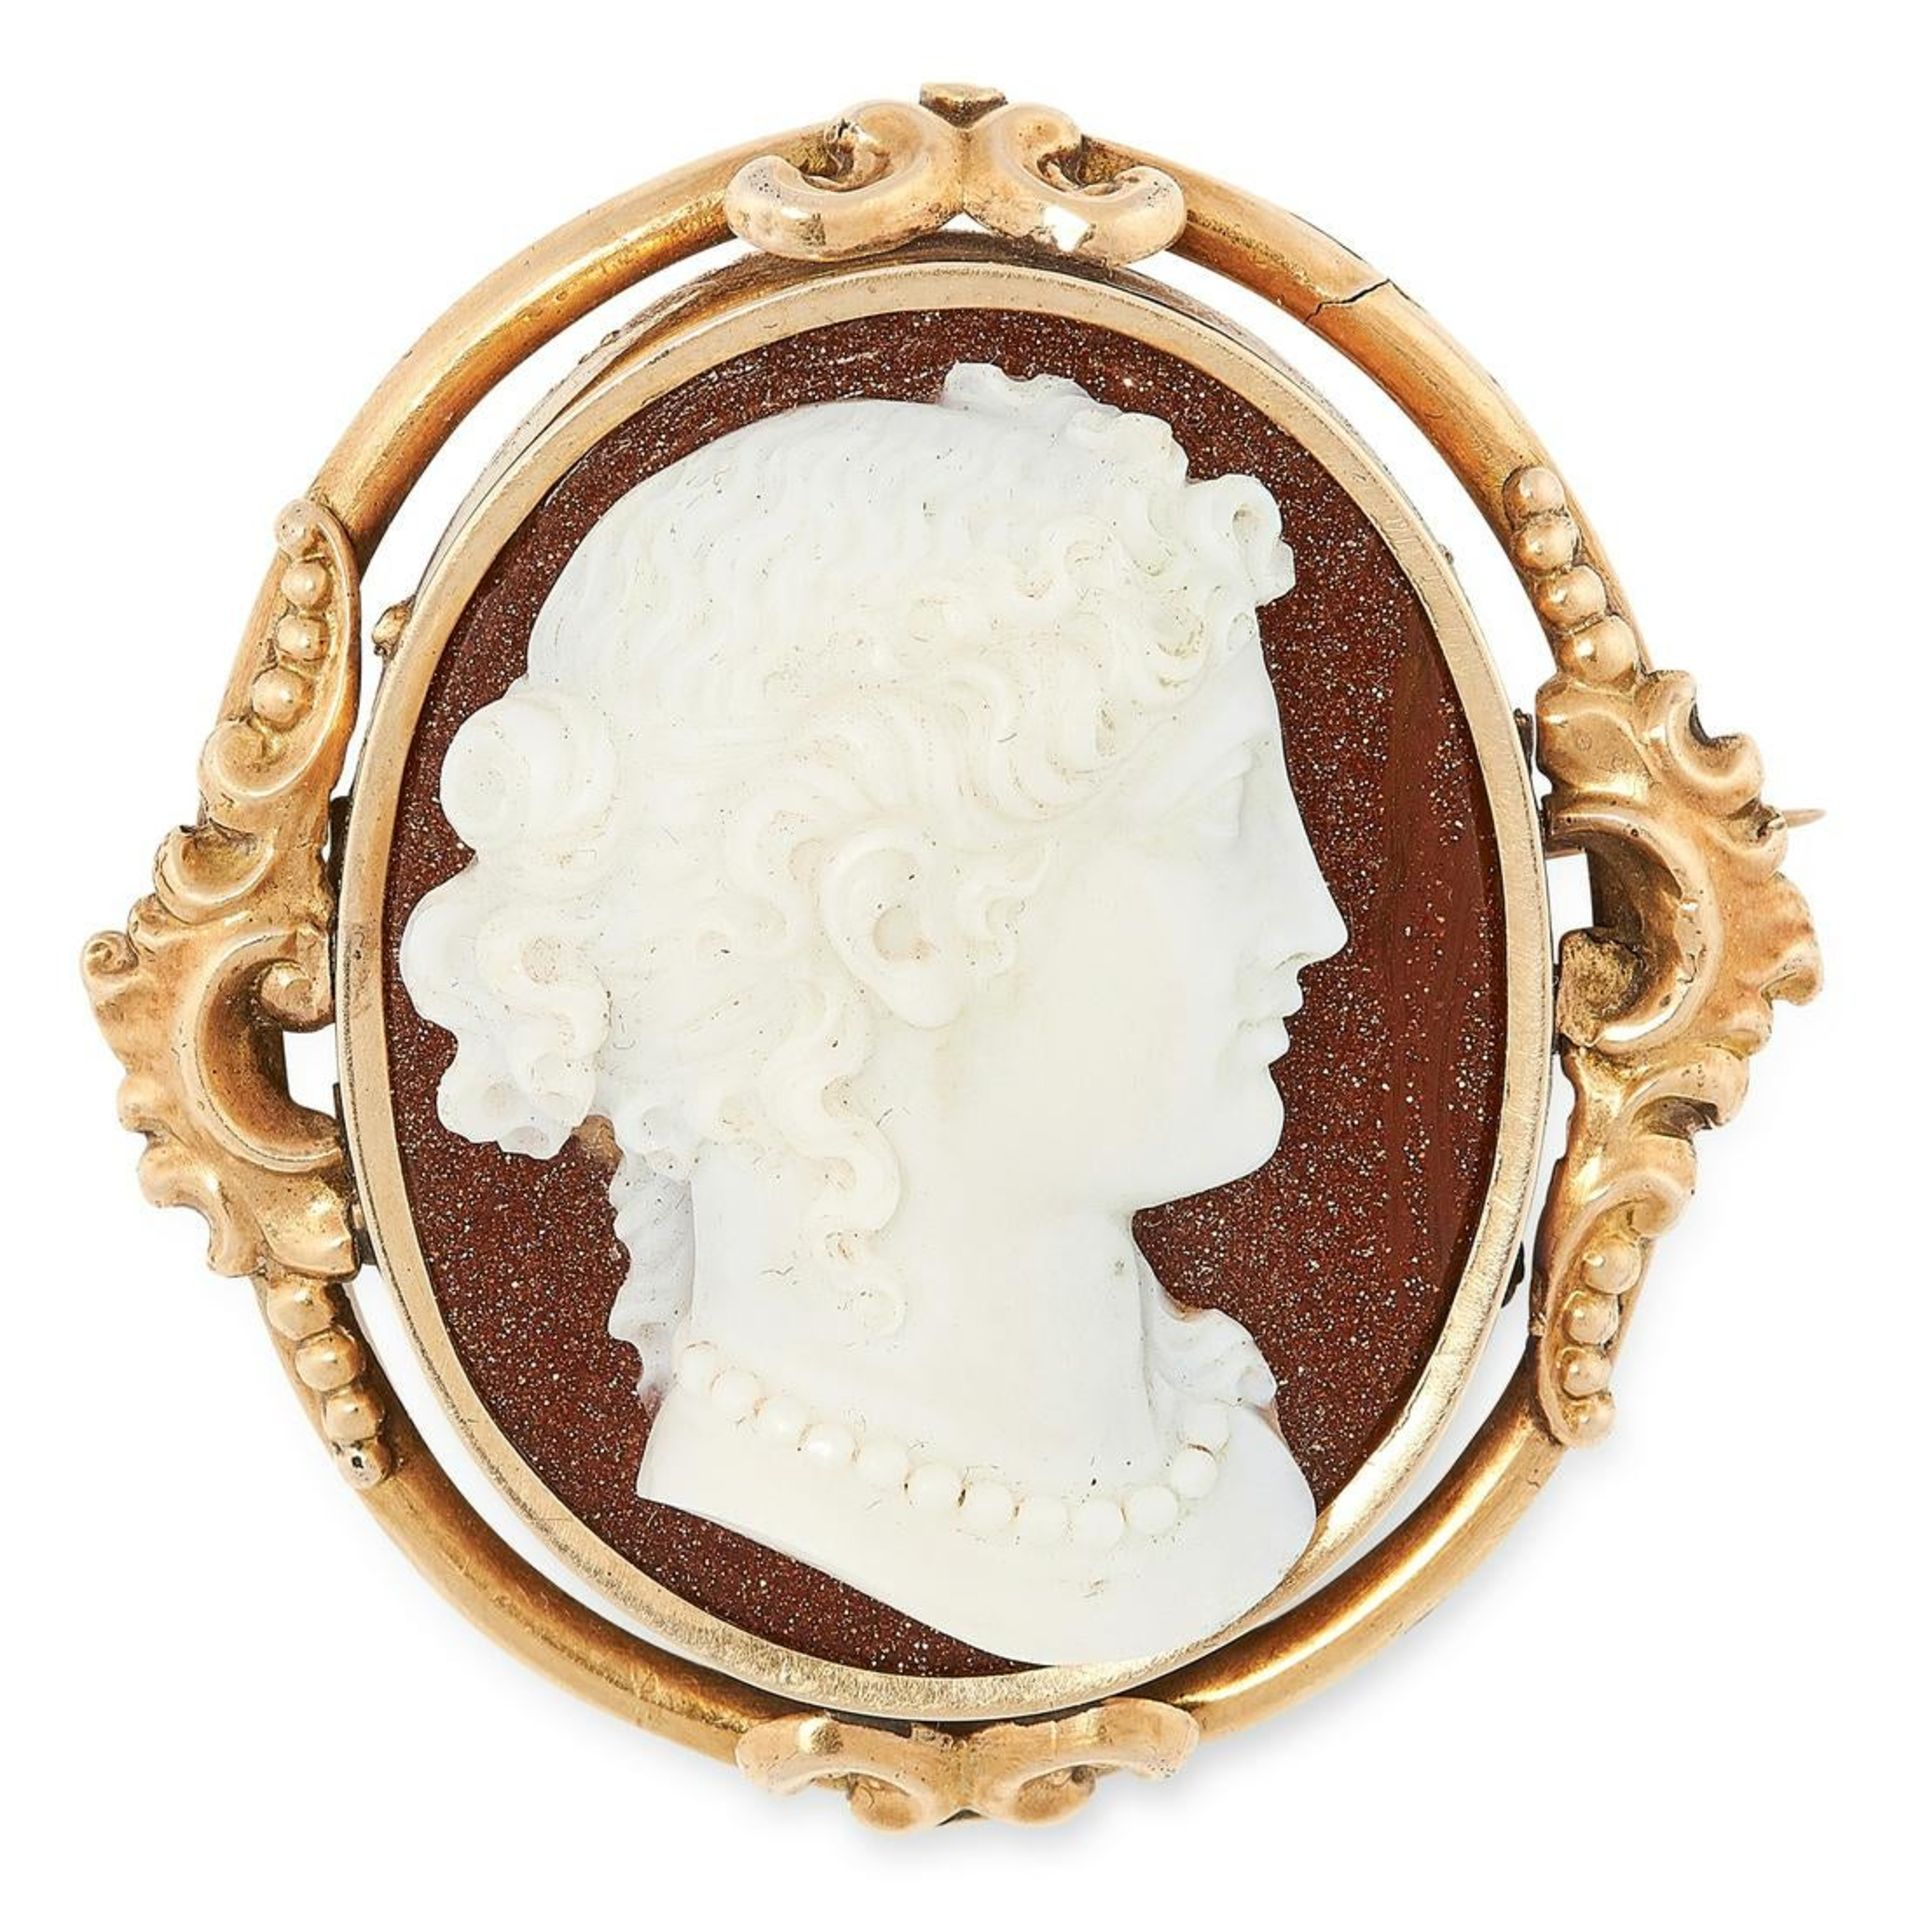 A GOLDSTONE CAMEO BROOCH comprising of a polished goldstone set with a carved cameo depicting a